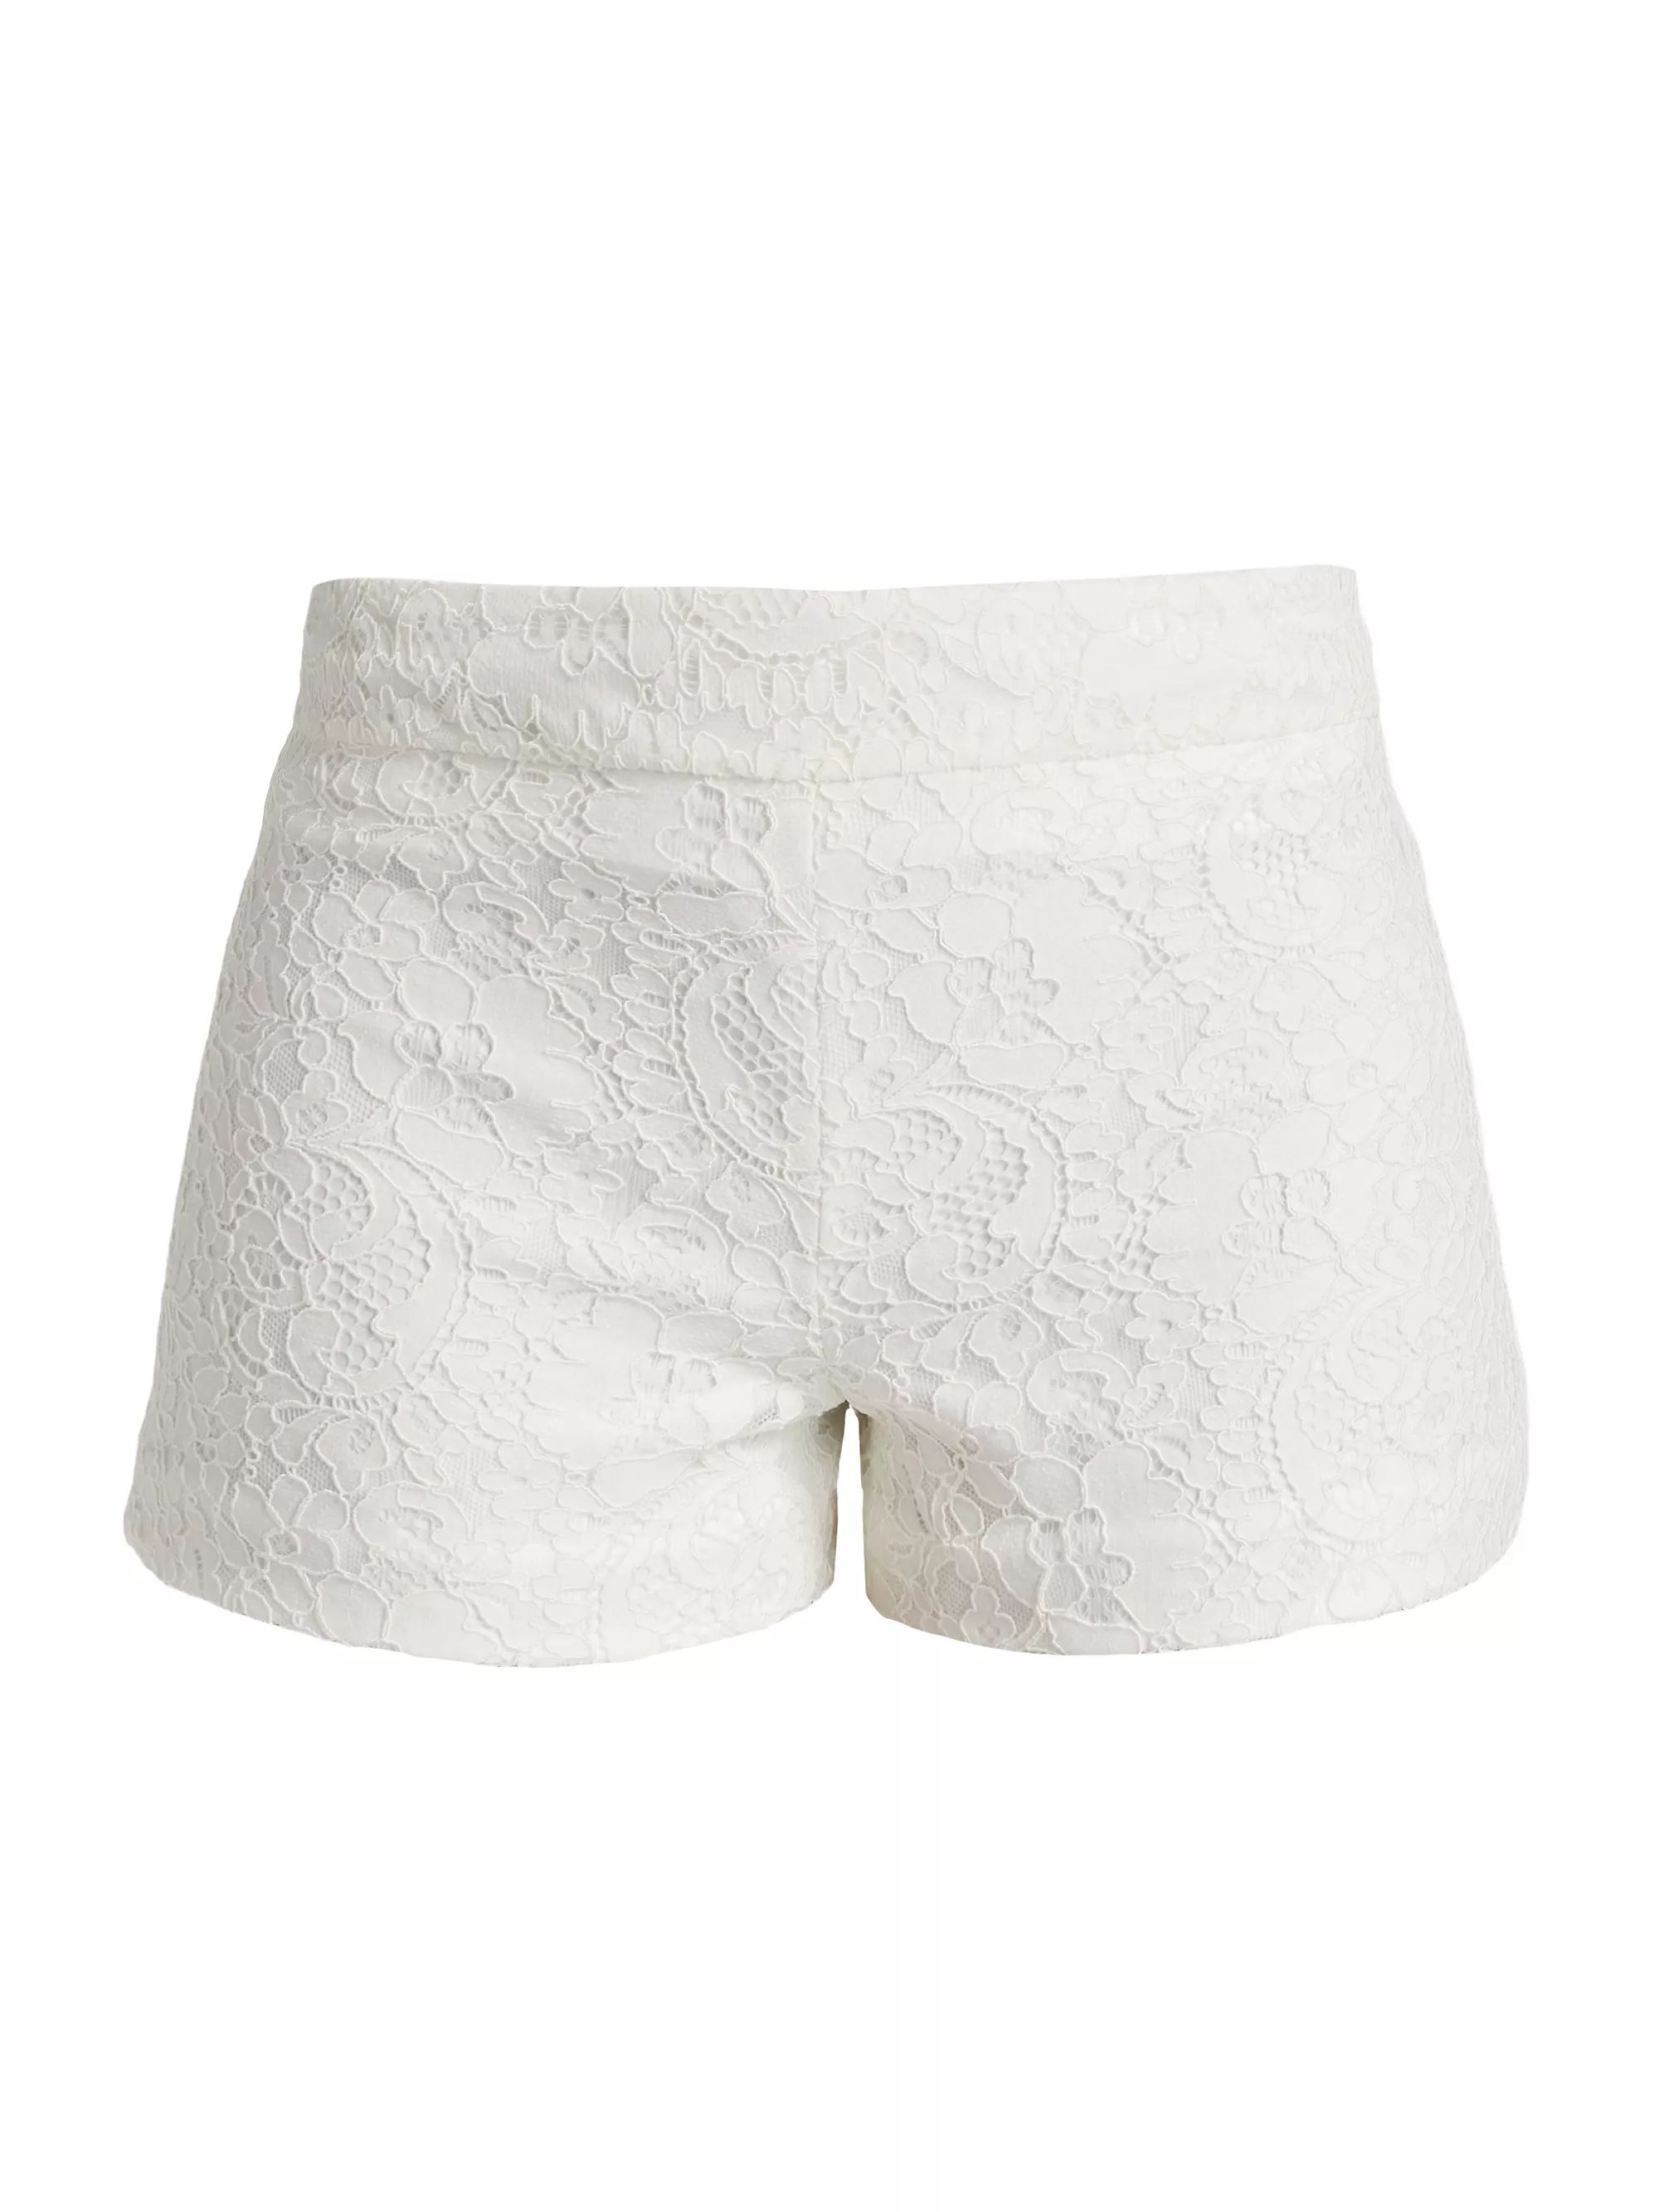 Dunn Lace Mid-Rise Shorts | Saks Fifth Avenue